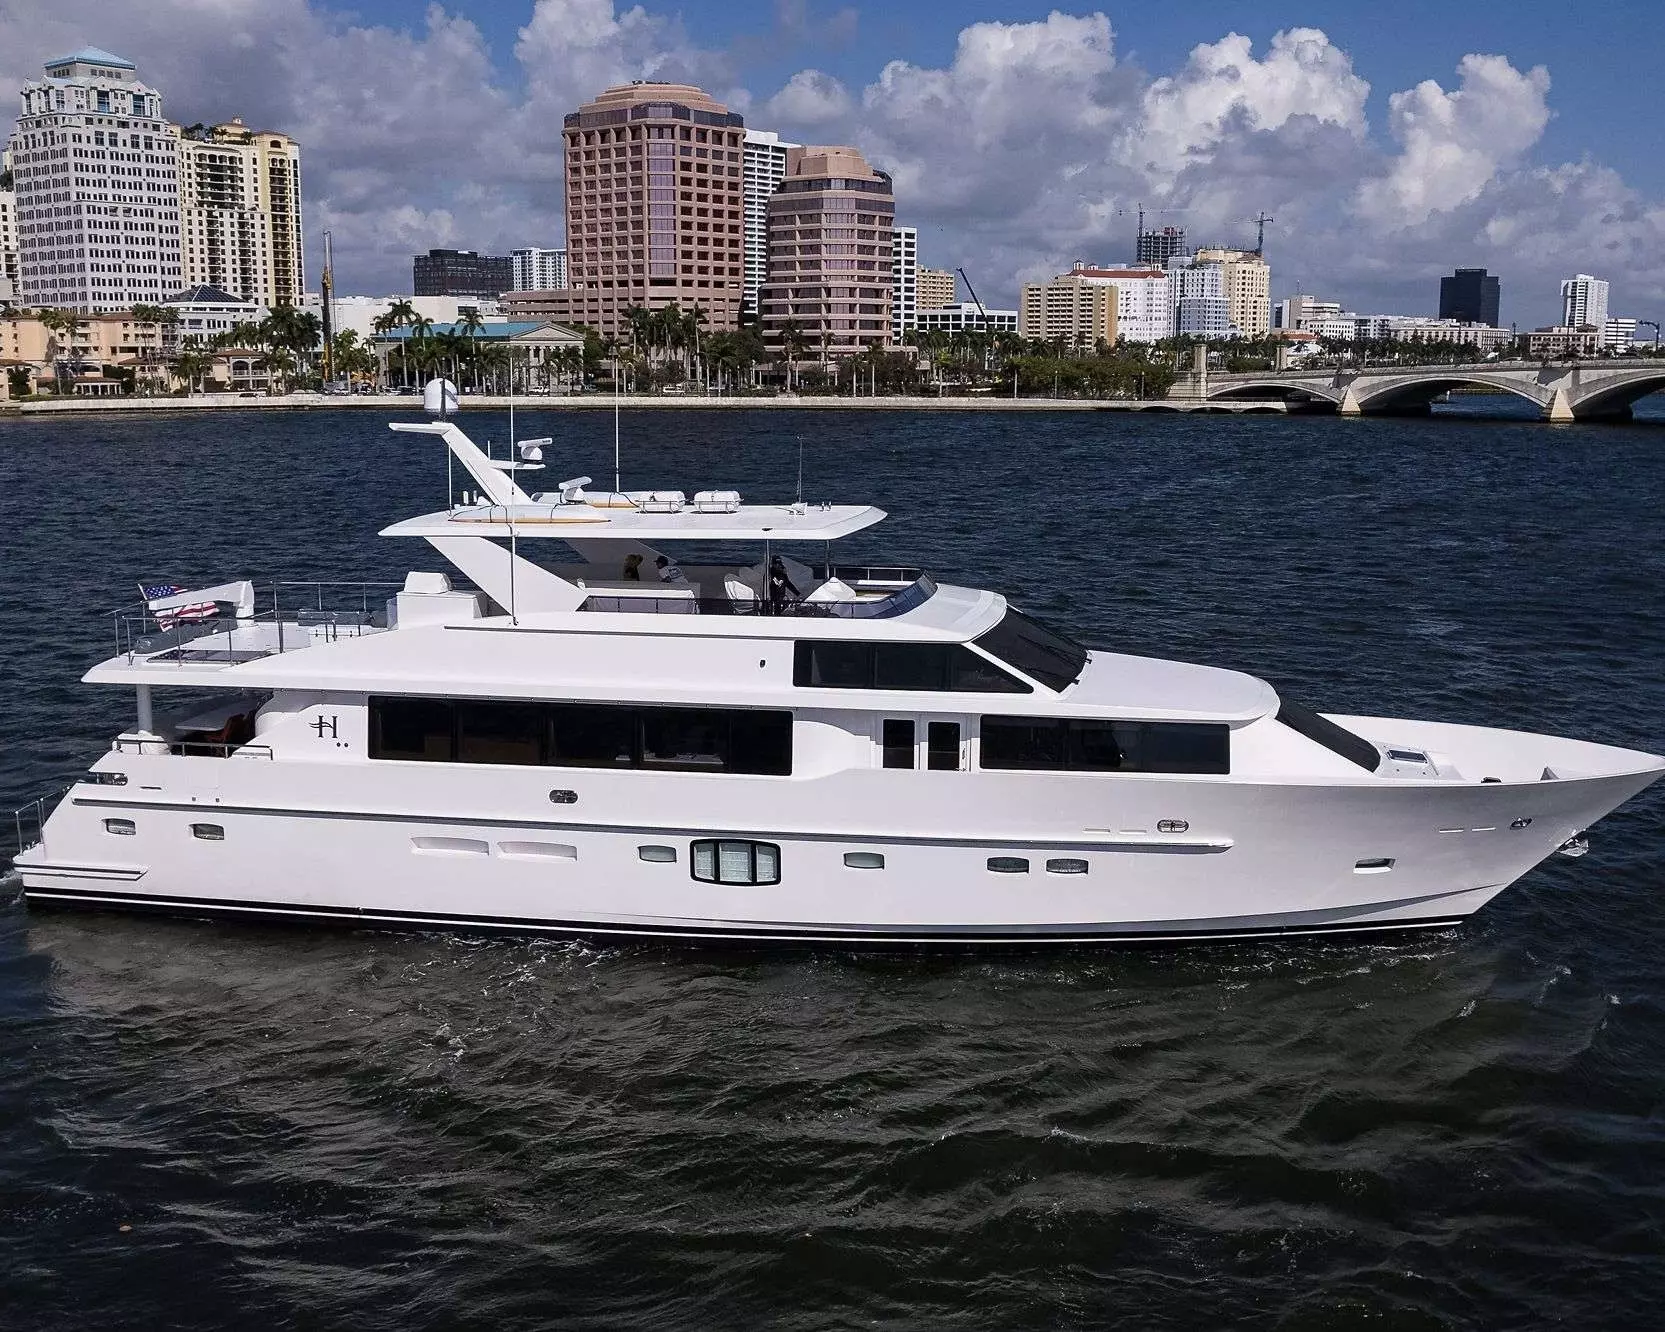 Risk Taker by Hargrave - Top rates for a Charter of a private Superyacht in Bahamas